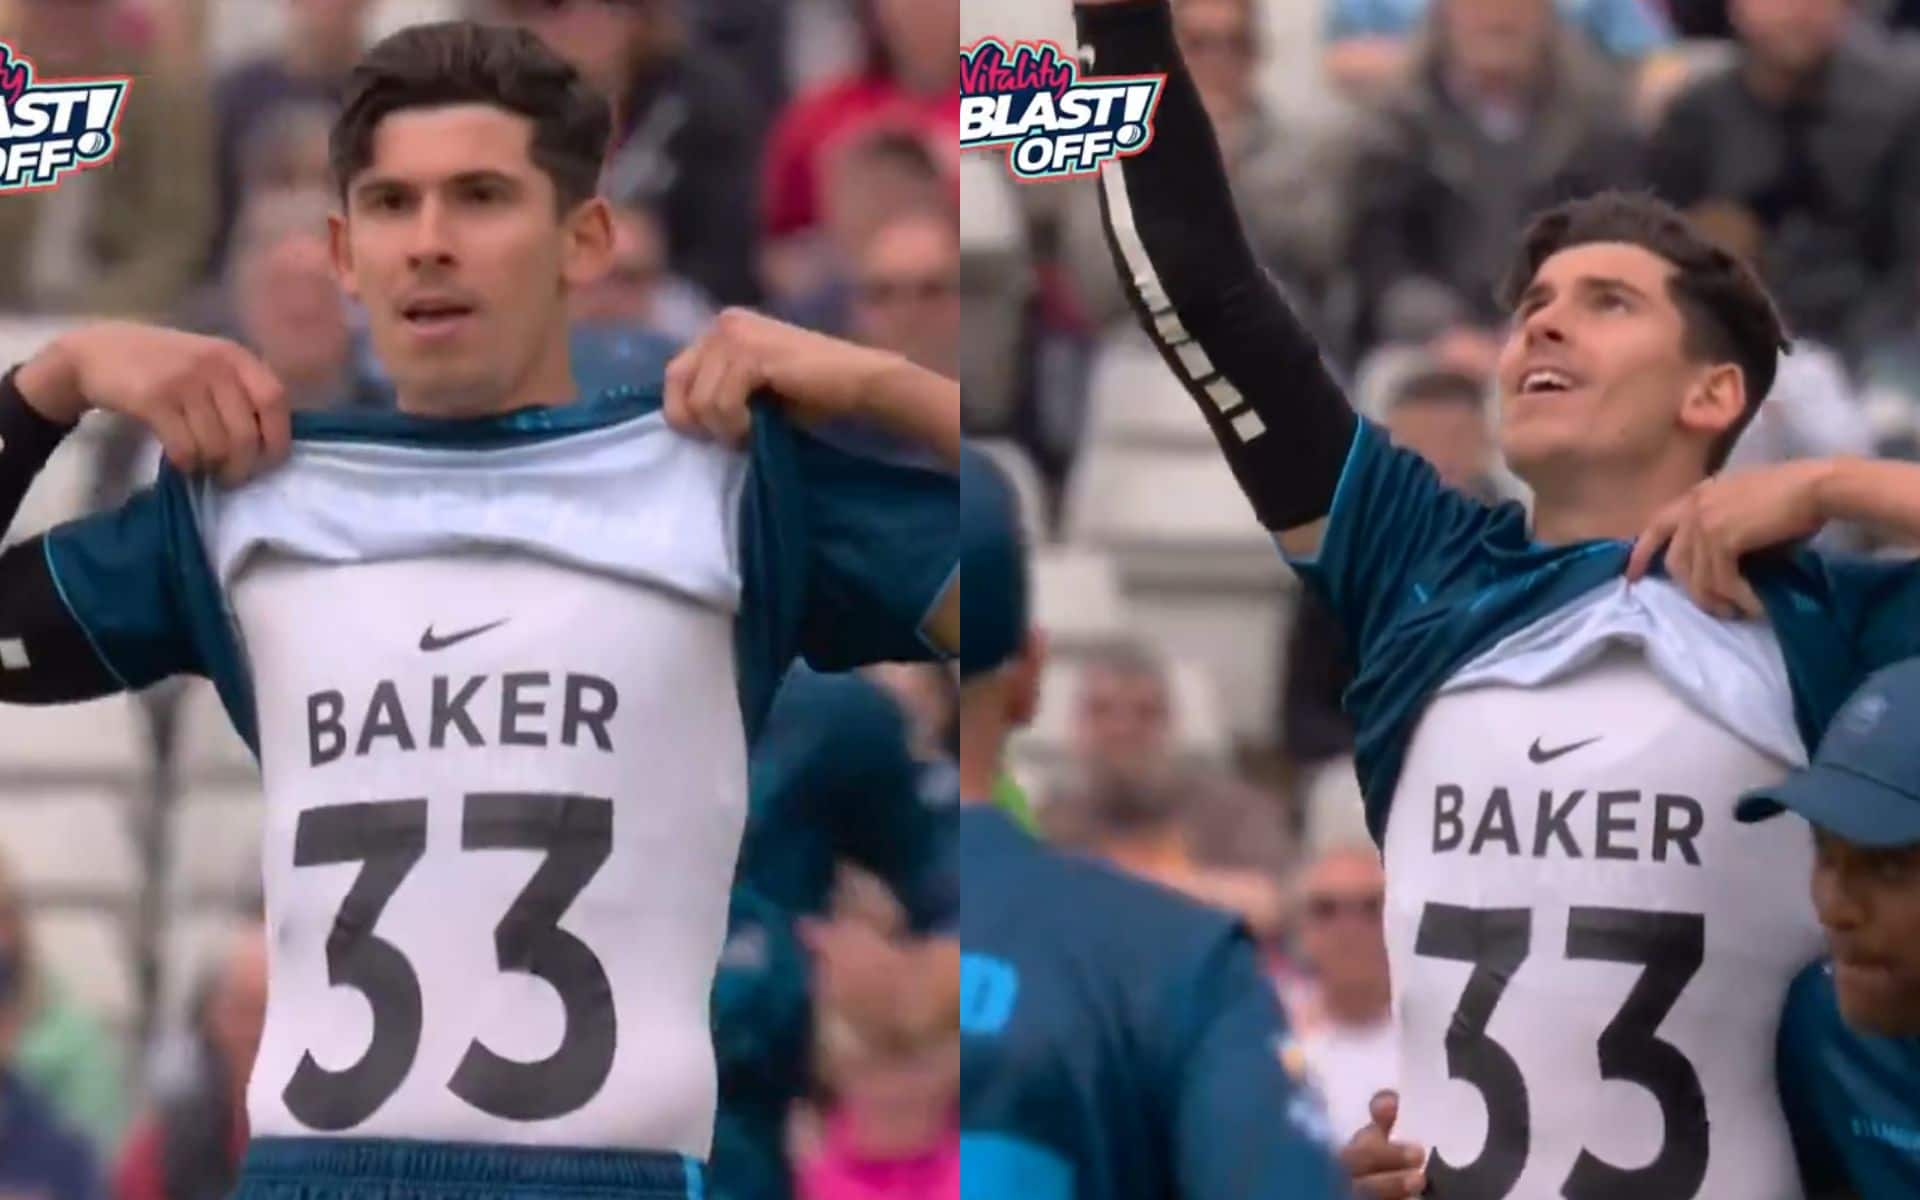 Patrick Brown shows Josh Baker's jersey number during a T20 Blast game [x.com]